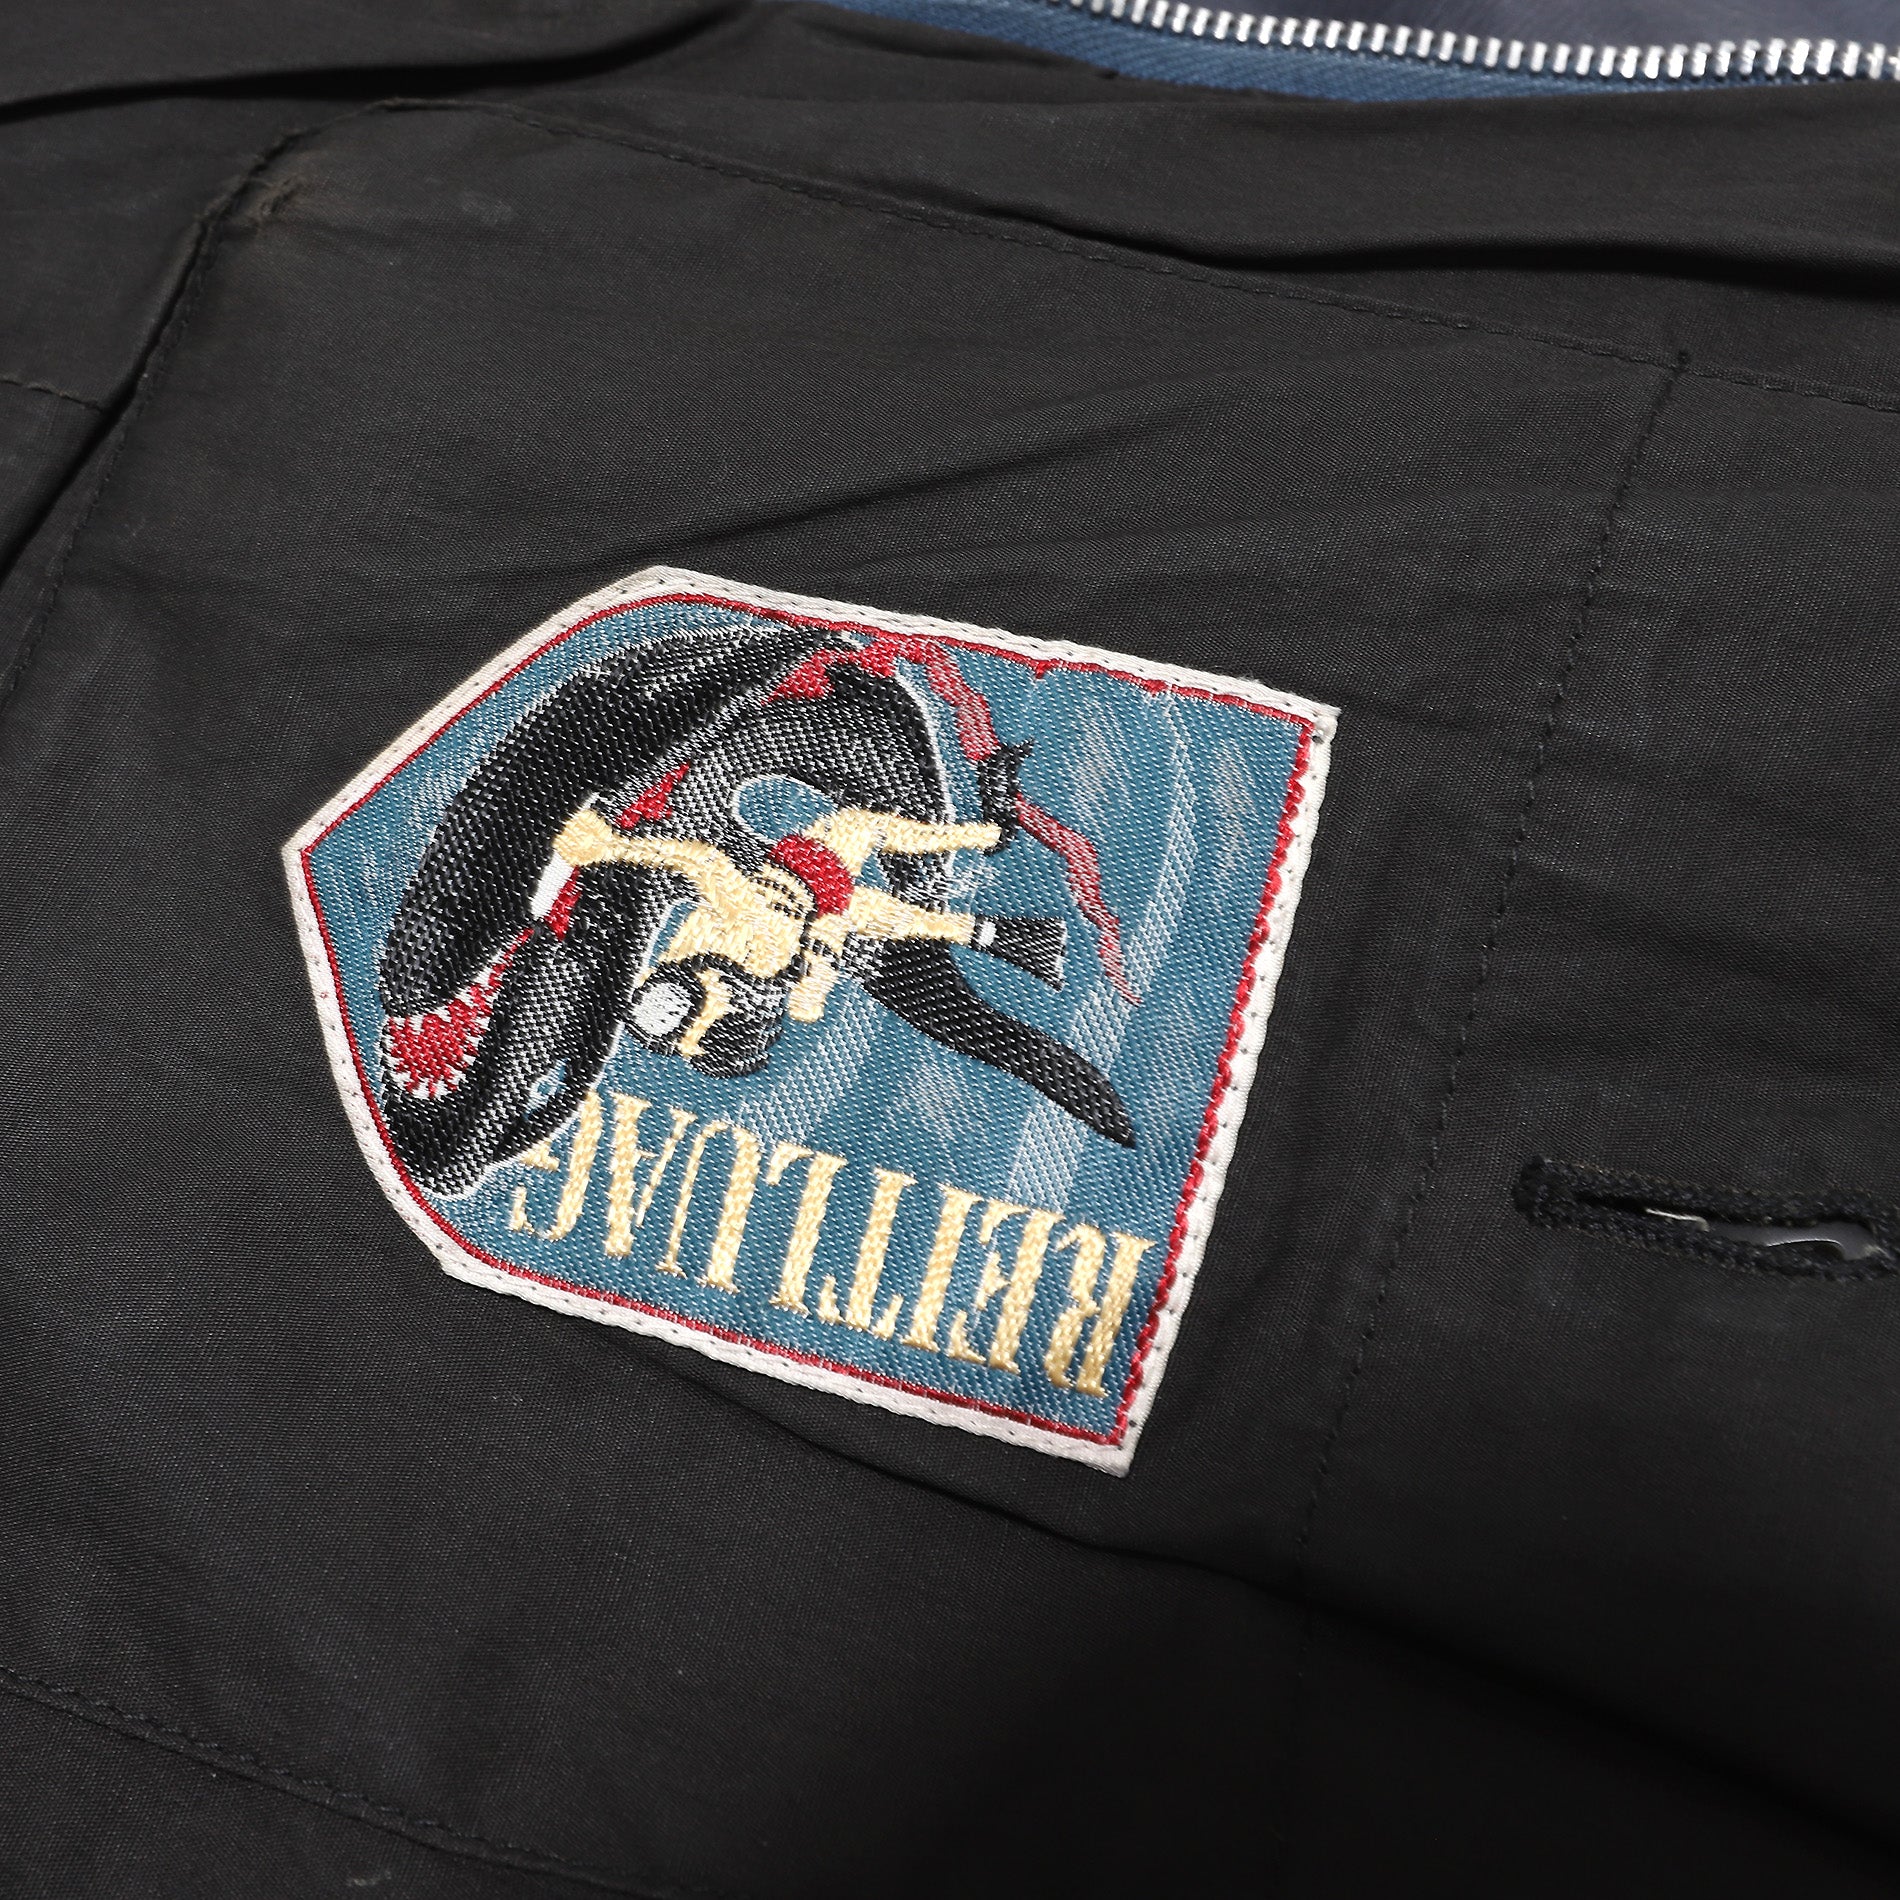 Jean Paul Gaultier AW87 Patched Leather Bomber Jacket.